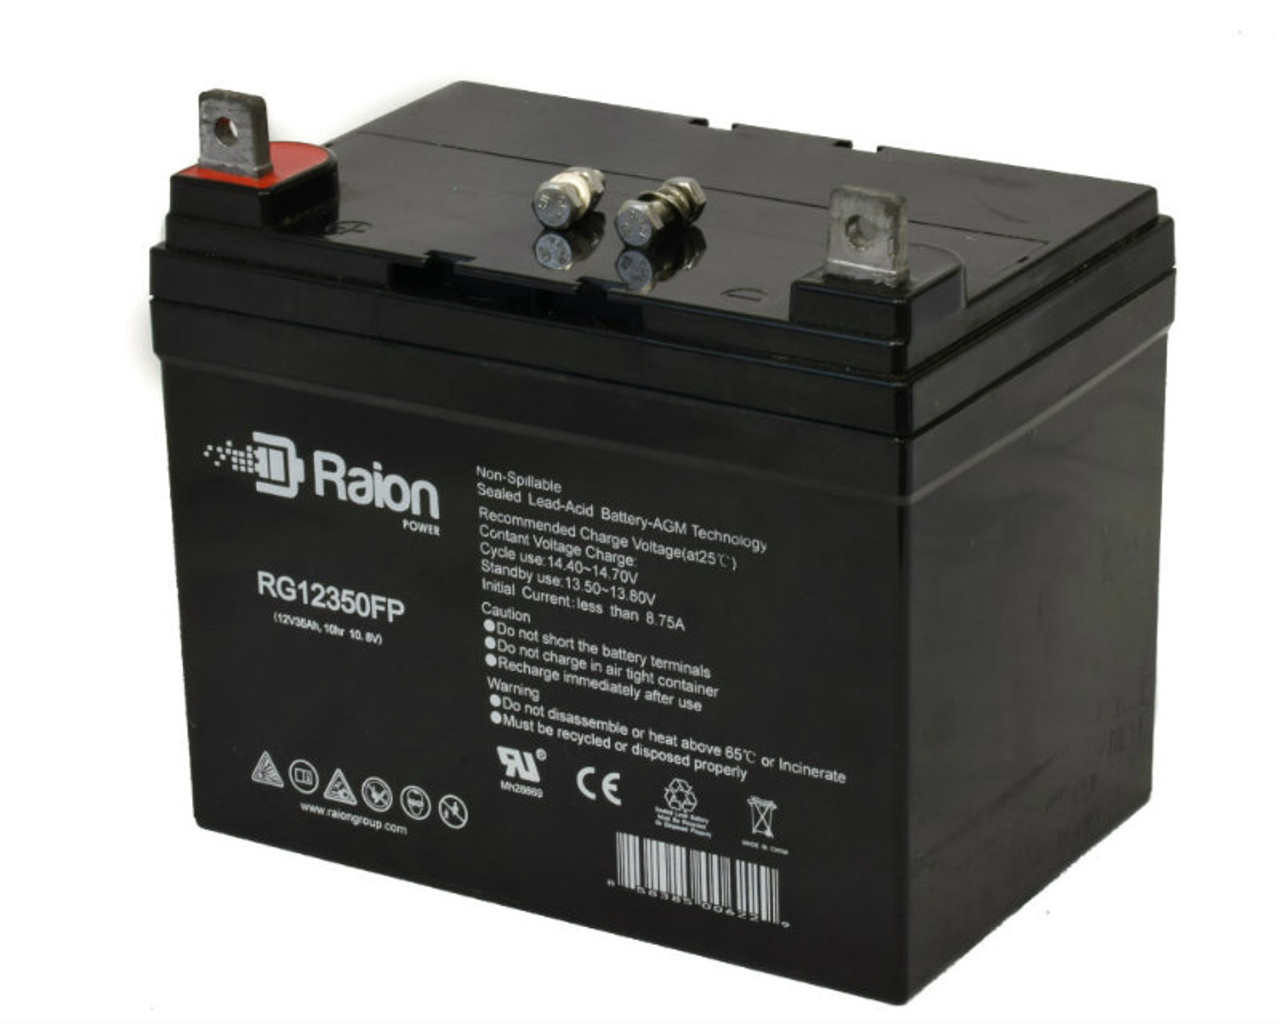 Raion Power Replacement 12V 35Ah RG12350FP Battery for Spirit Pro 16H